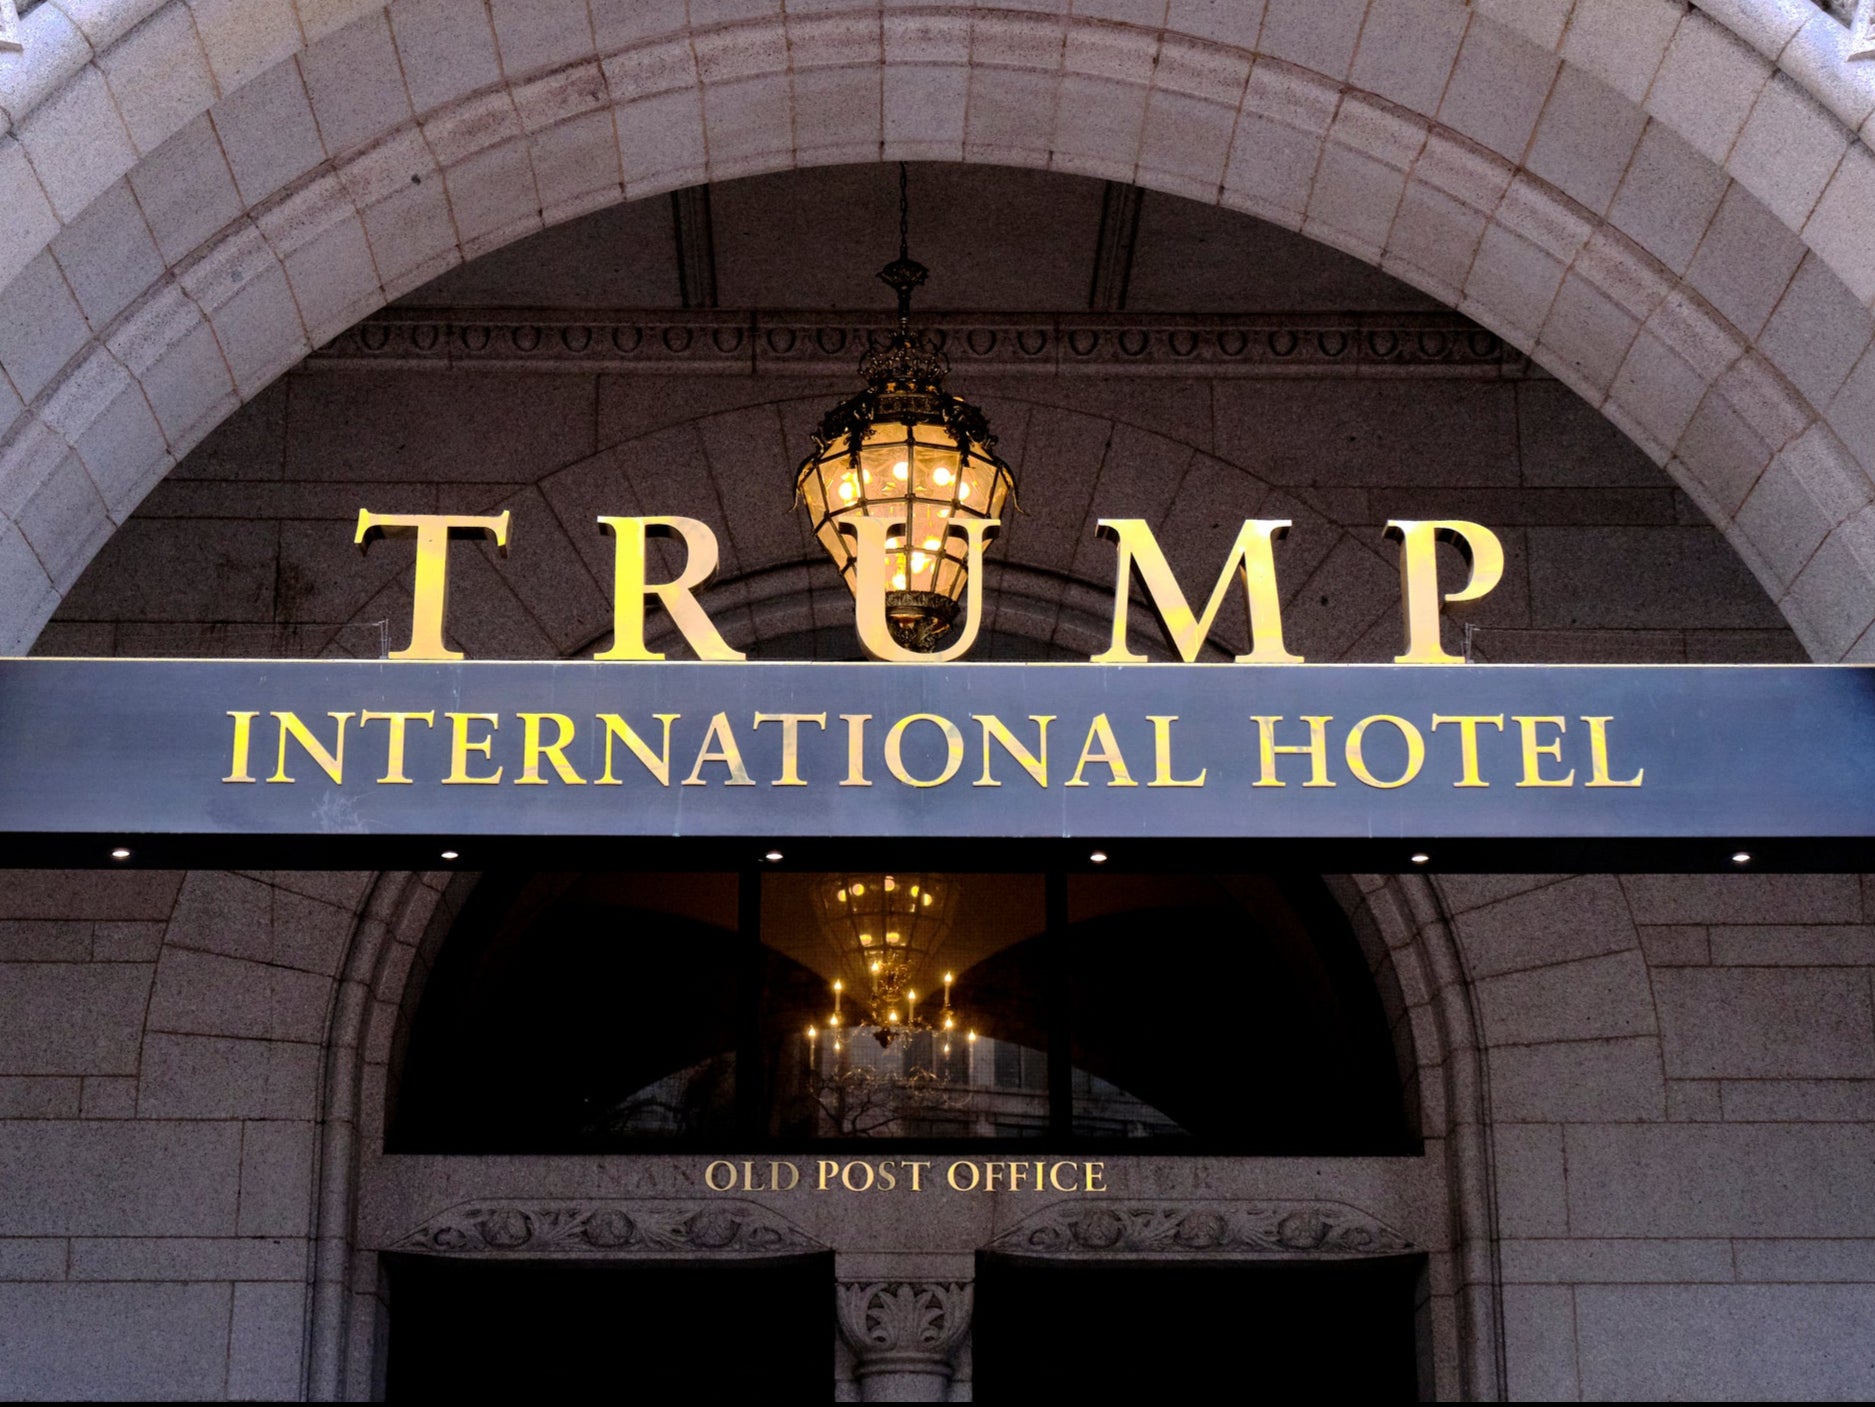 A night at Trump’s hotel is $7,500 cheaper tonight than a year ago